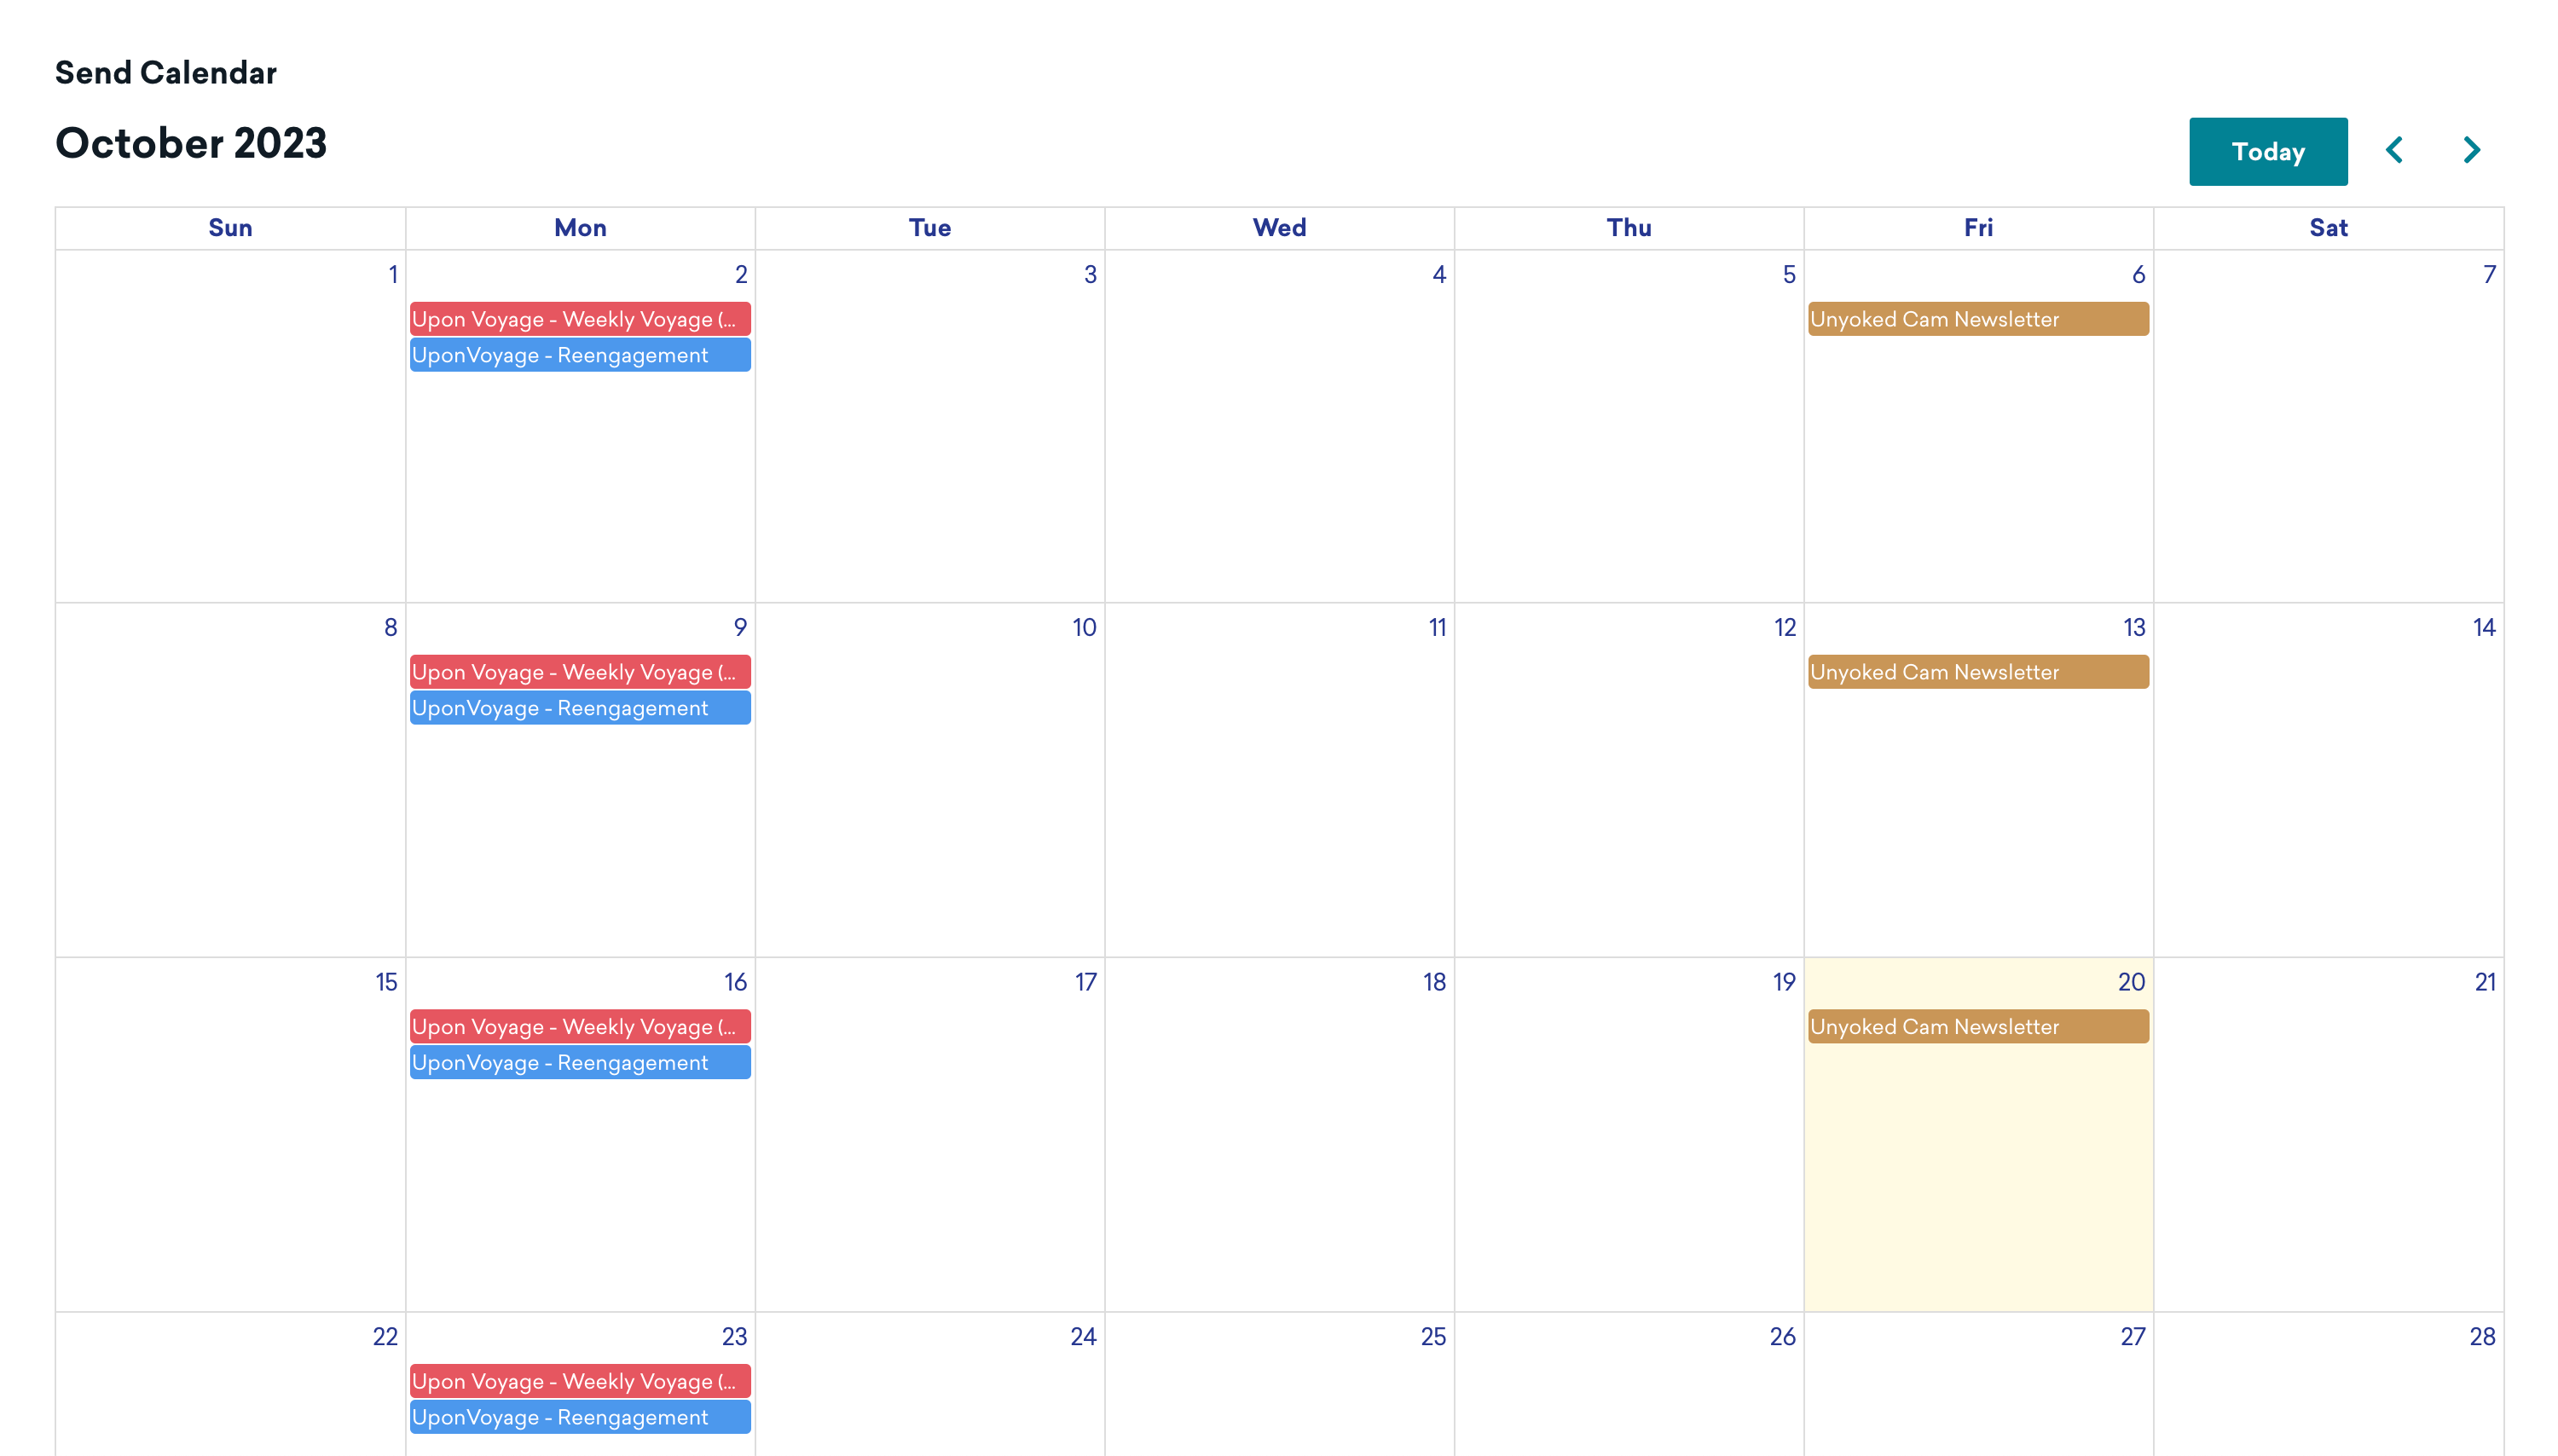 The Send Calendar displaying all scheduled campaigns in the current month.